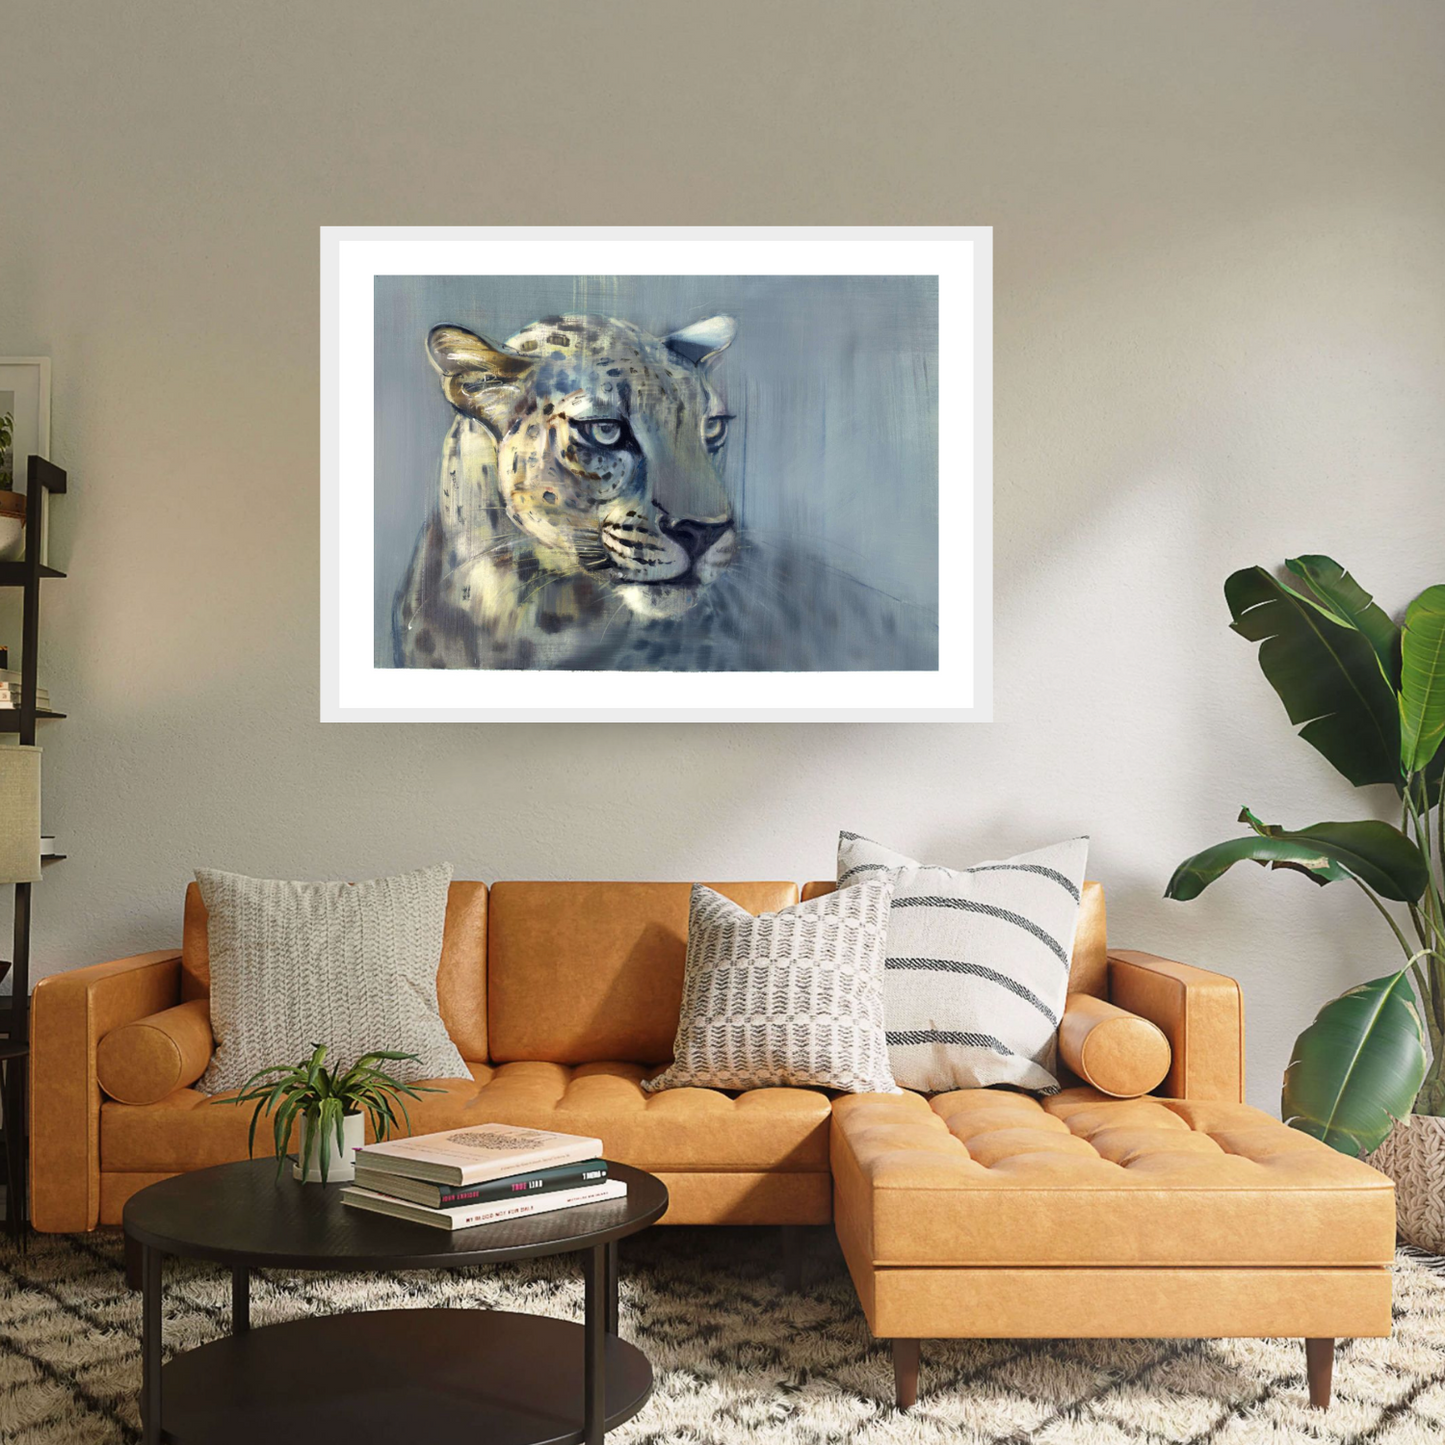 White framed ‘Predator II' by Mark Adlington. This artwork depicts an Arabian leopard with piercing eyes, blending seamlessly into its surroundings. Available as fine art prints, it's a captivating addition to any collection, capturing the elusive beauty of wildlife with stunning detail.